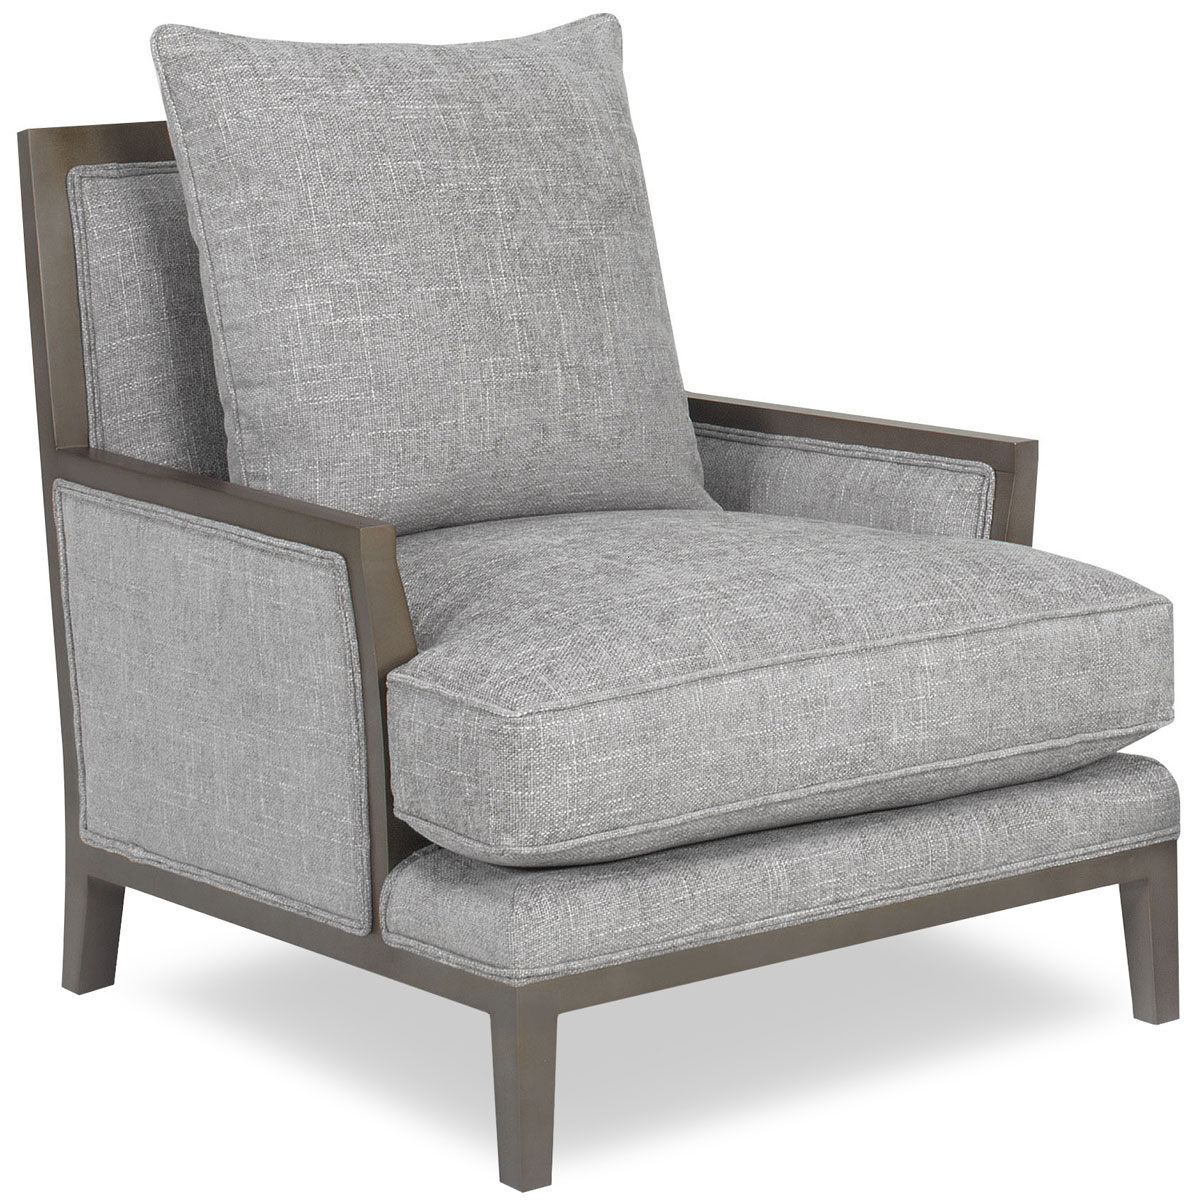 Temple Furniture 515 Hunk Chair